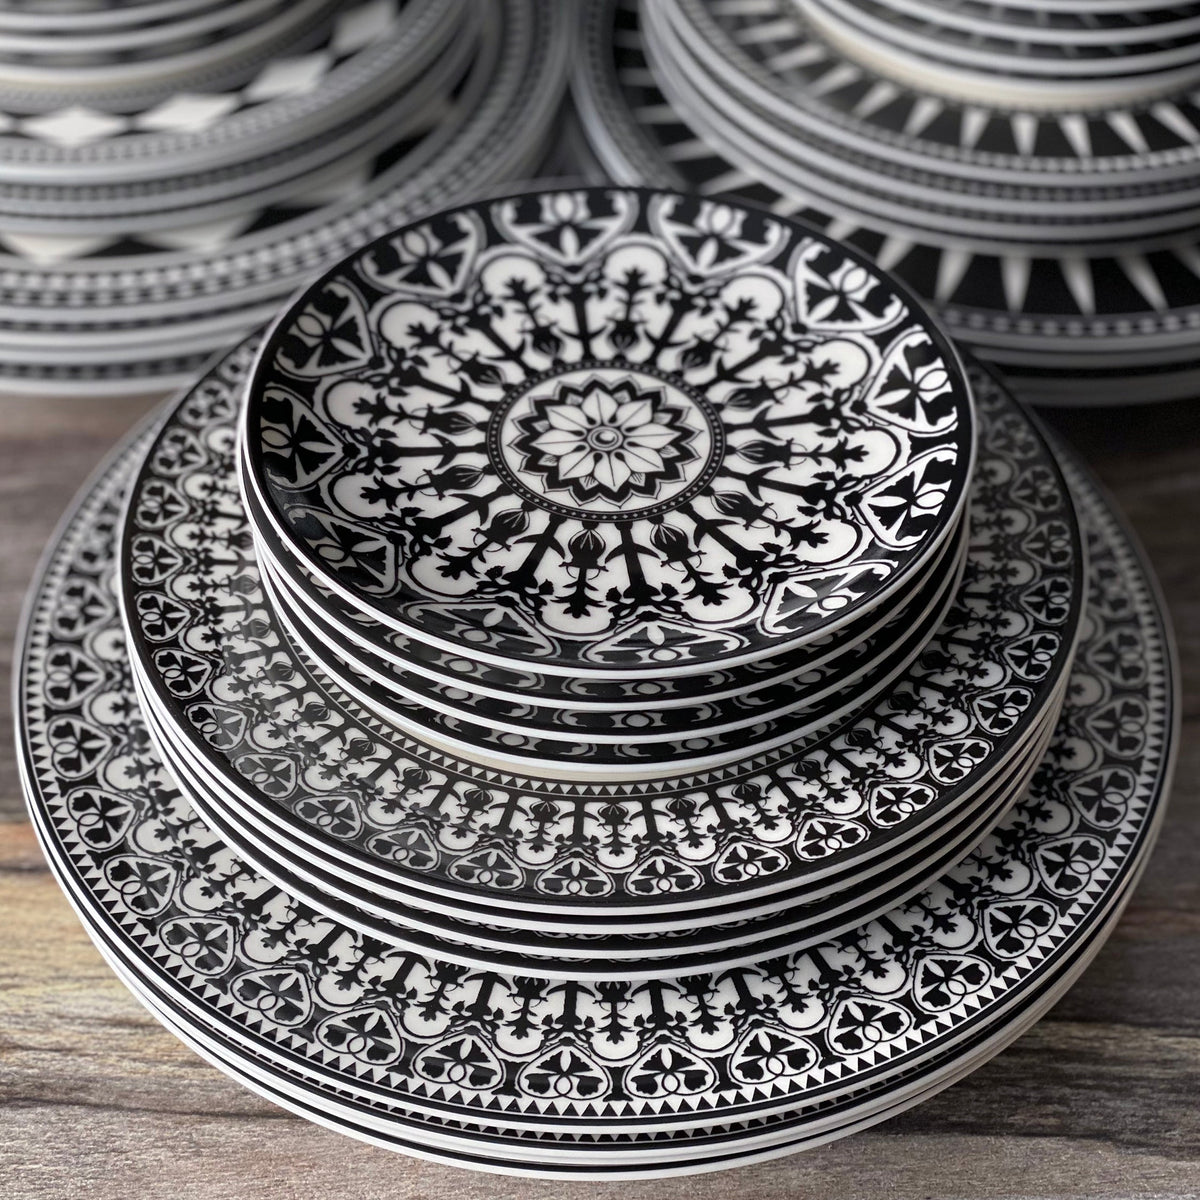 A stack of Casablanca Rimmed Dinner Plates by Caskata Artisanal Home with intricate black and white geometric and floral patterns, hand-decorated details reminiscent of Casablanca dinnerware, arranged in size order on a wooden surface.